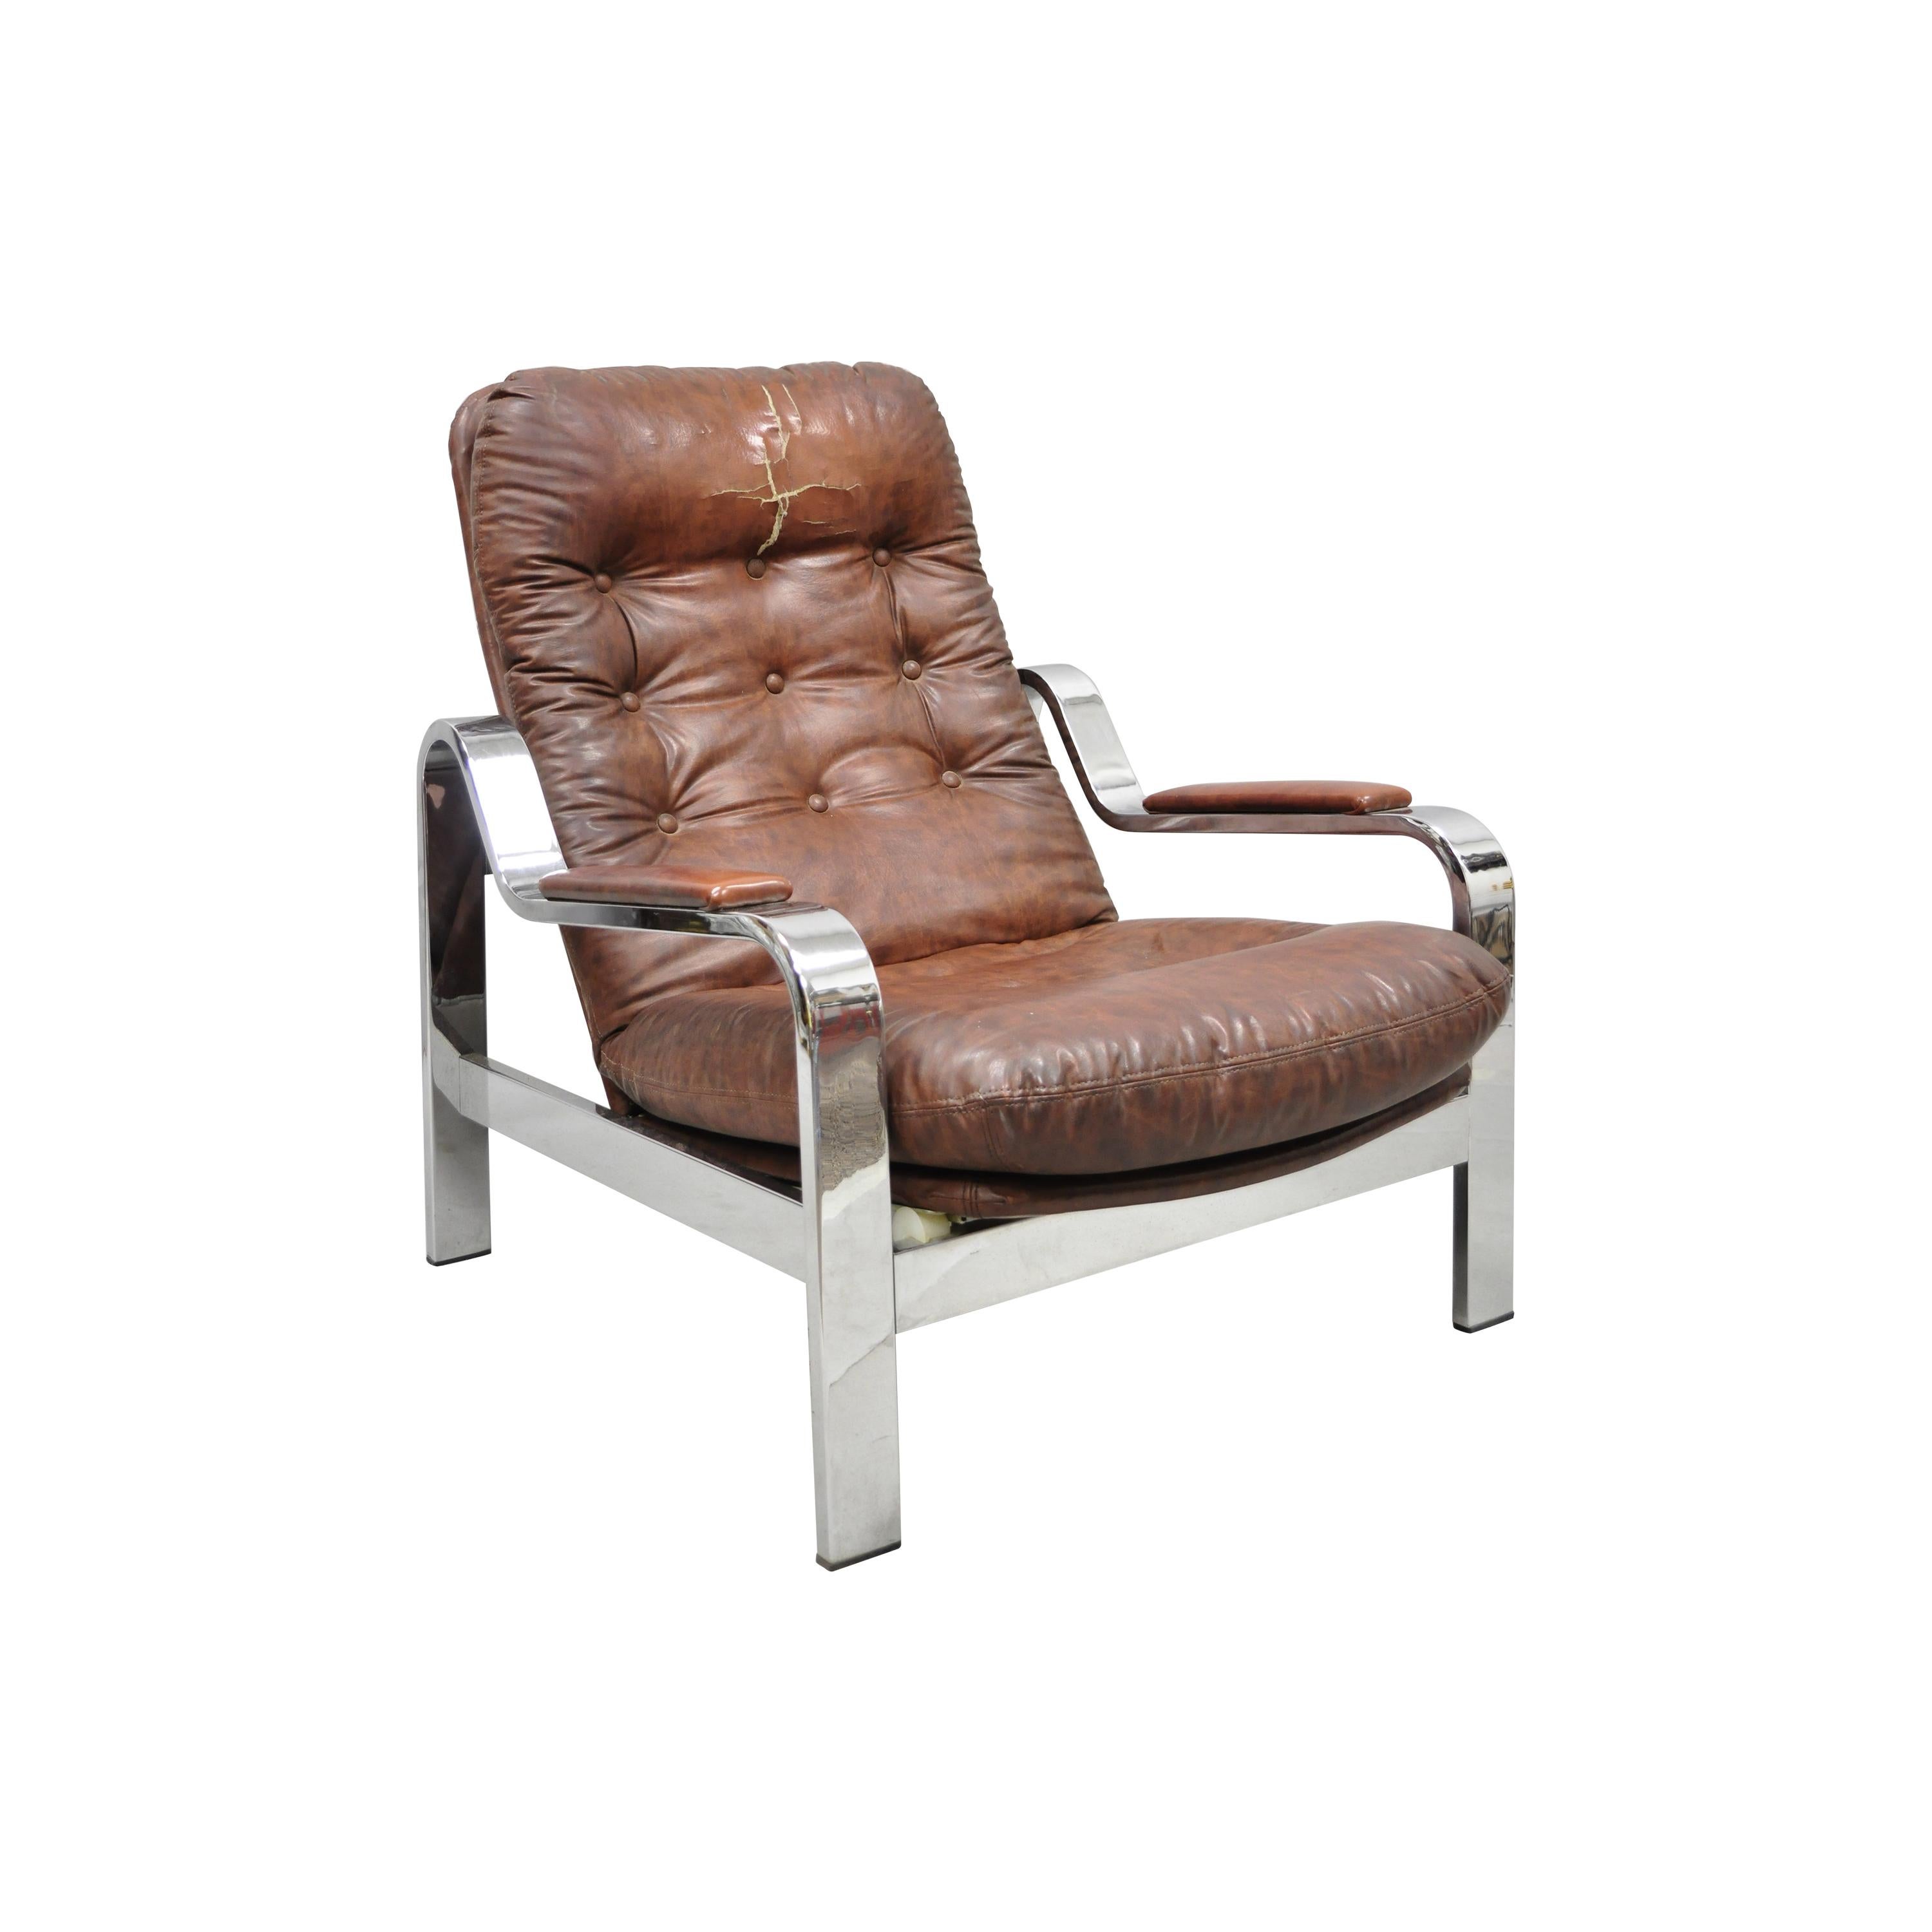 Midcentury Italian Modern Selig Chrome Reclining Recliner Lounge Chair For Sale